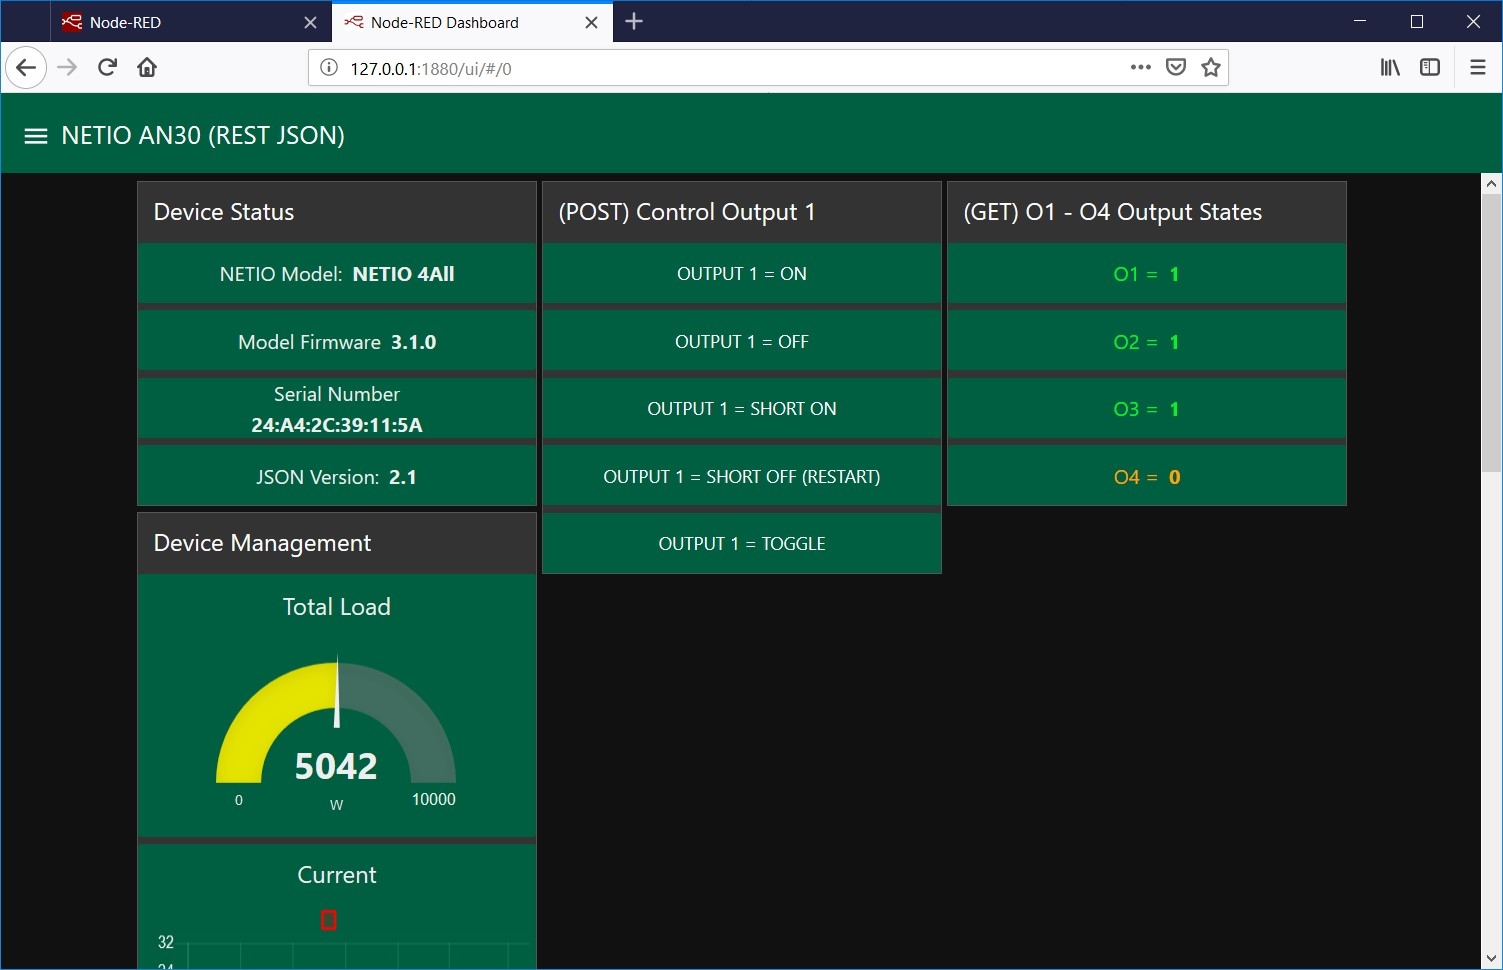 Node-RED dashboard for controlling NETIO power sockets